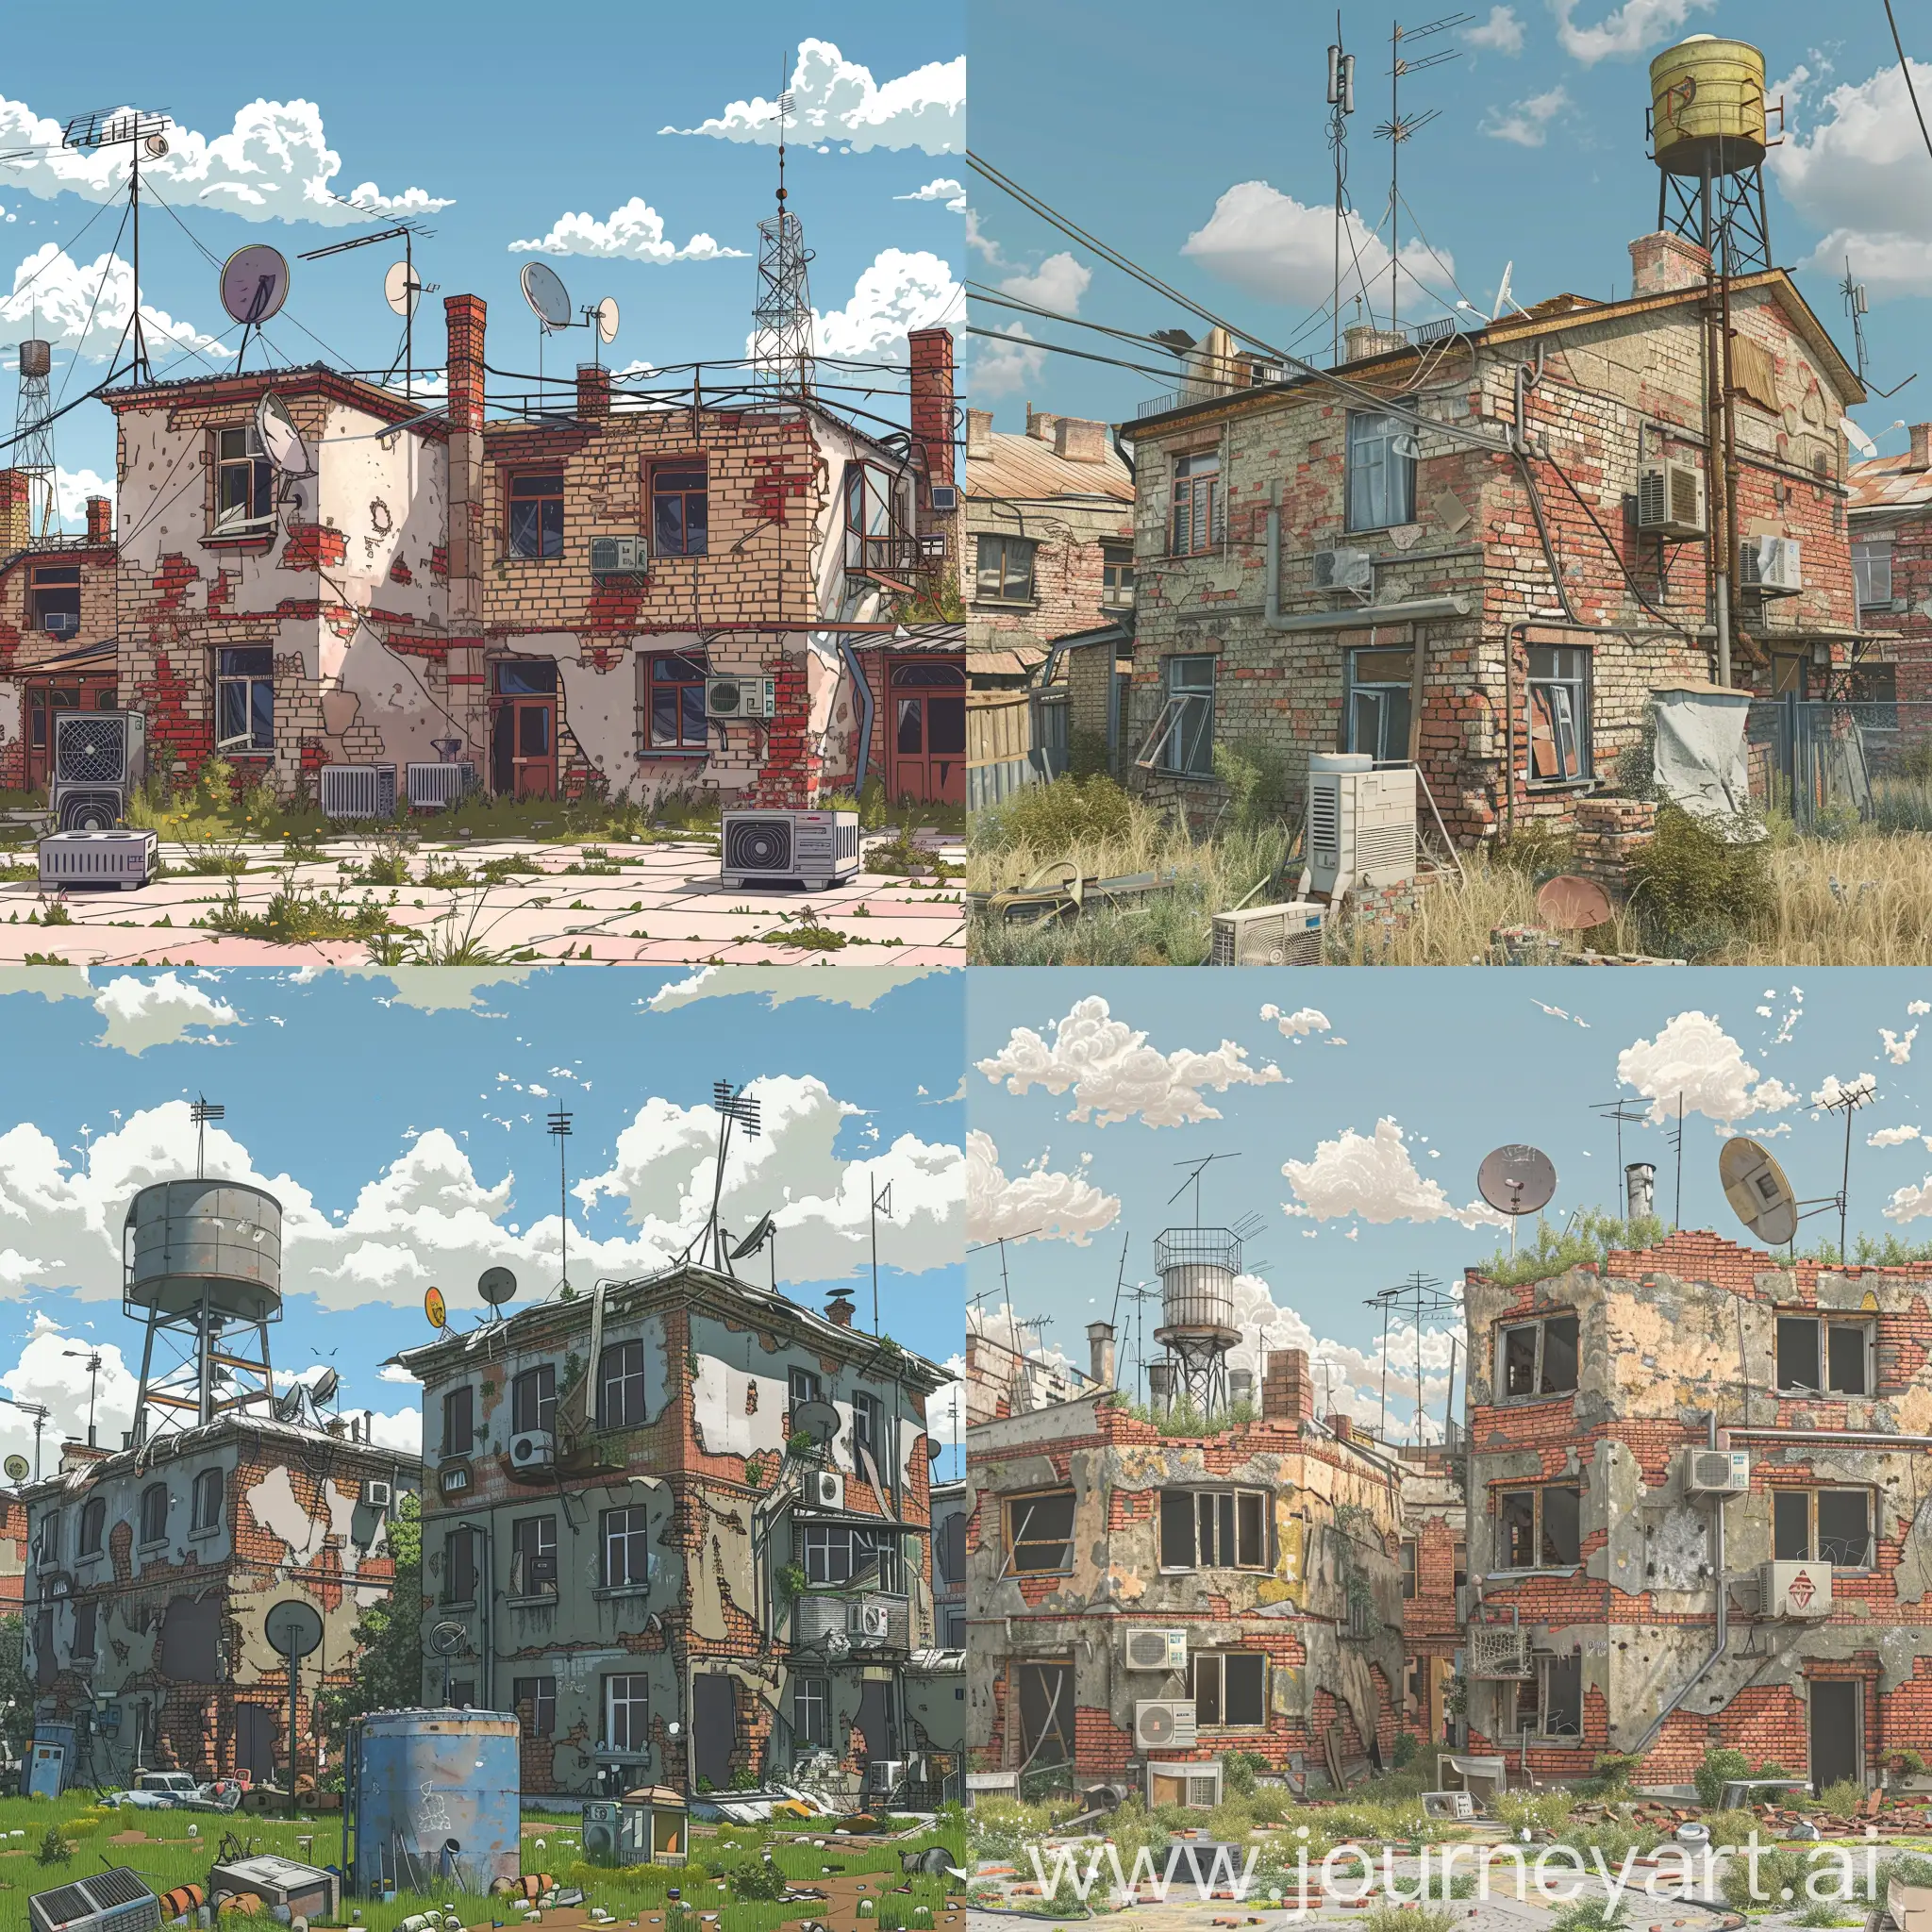 A poor village located near the south of Moscow, where there are two-story, unfinished, tattered, roofless brick residential buildings with TV antennas, water towers and air conditioners in 2D.